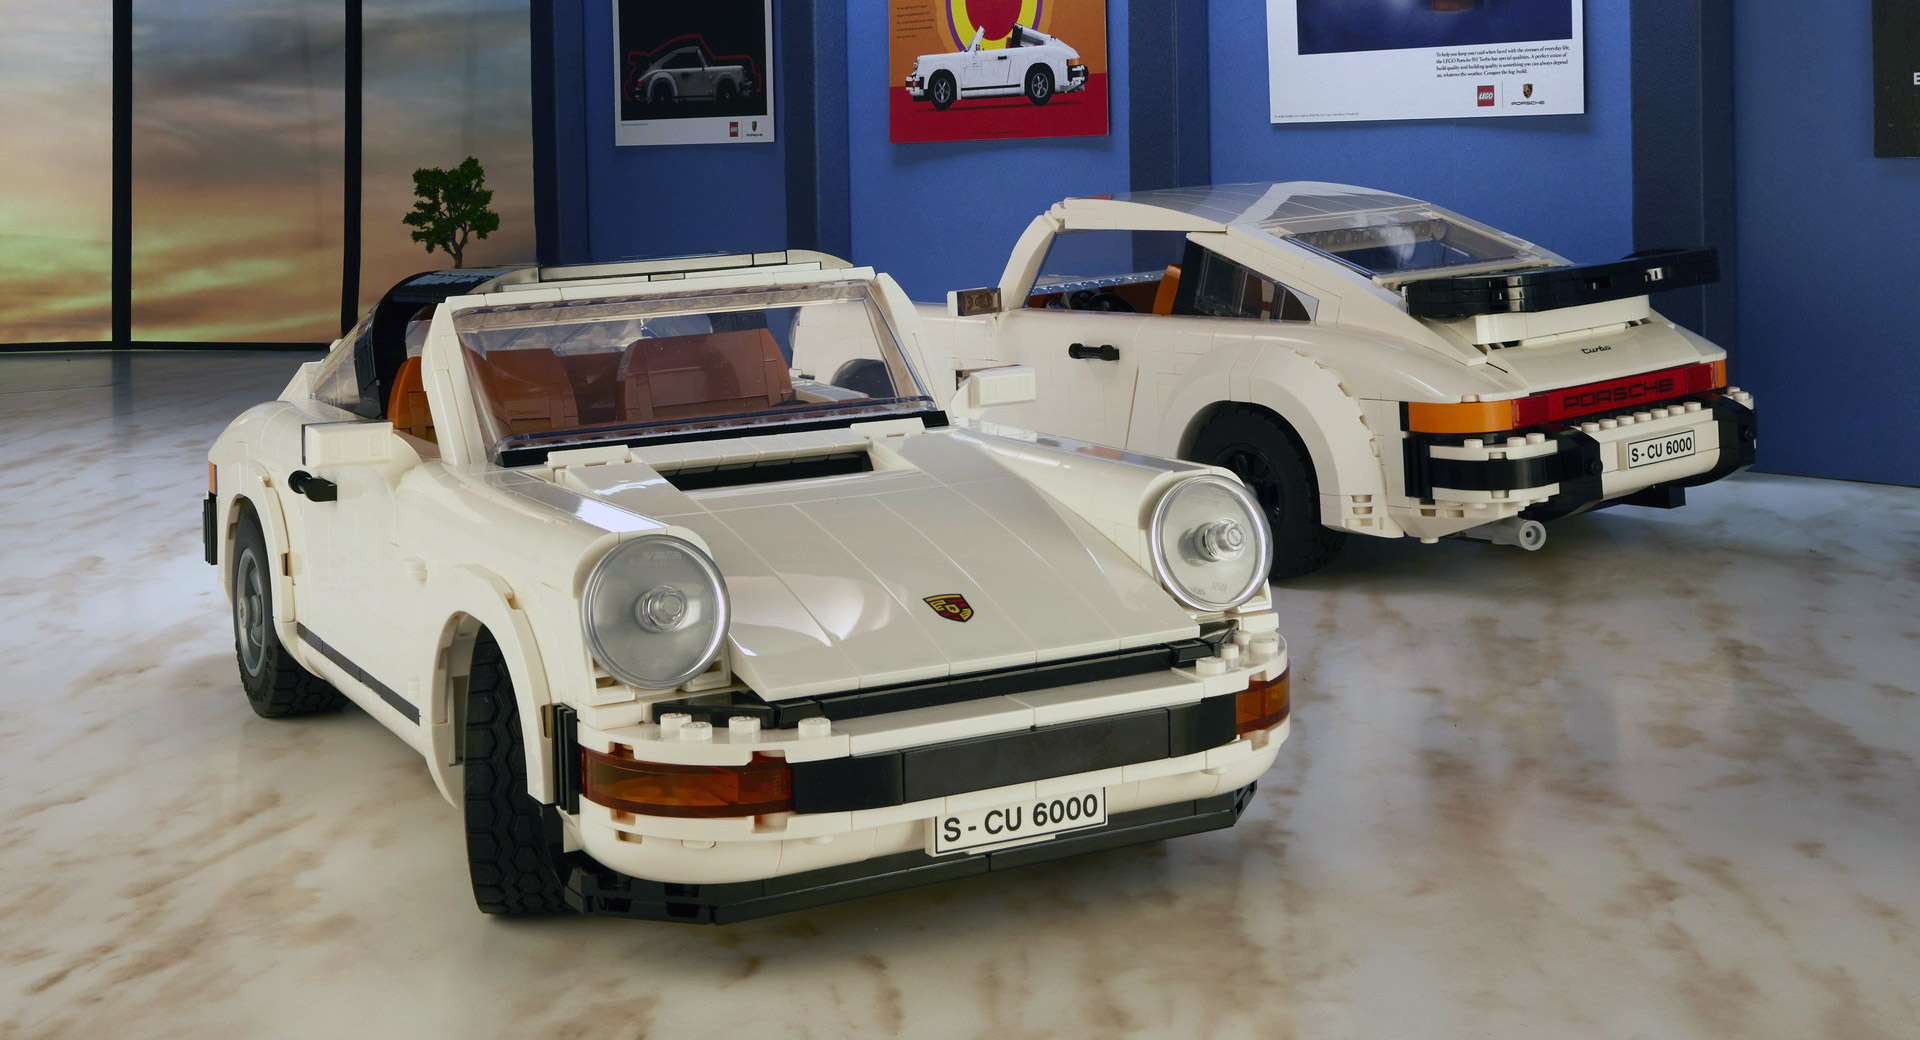 New LEGO Two-In-One Set Lets You Build A Porsche 911 Turbo Or A